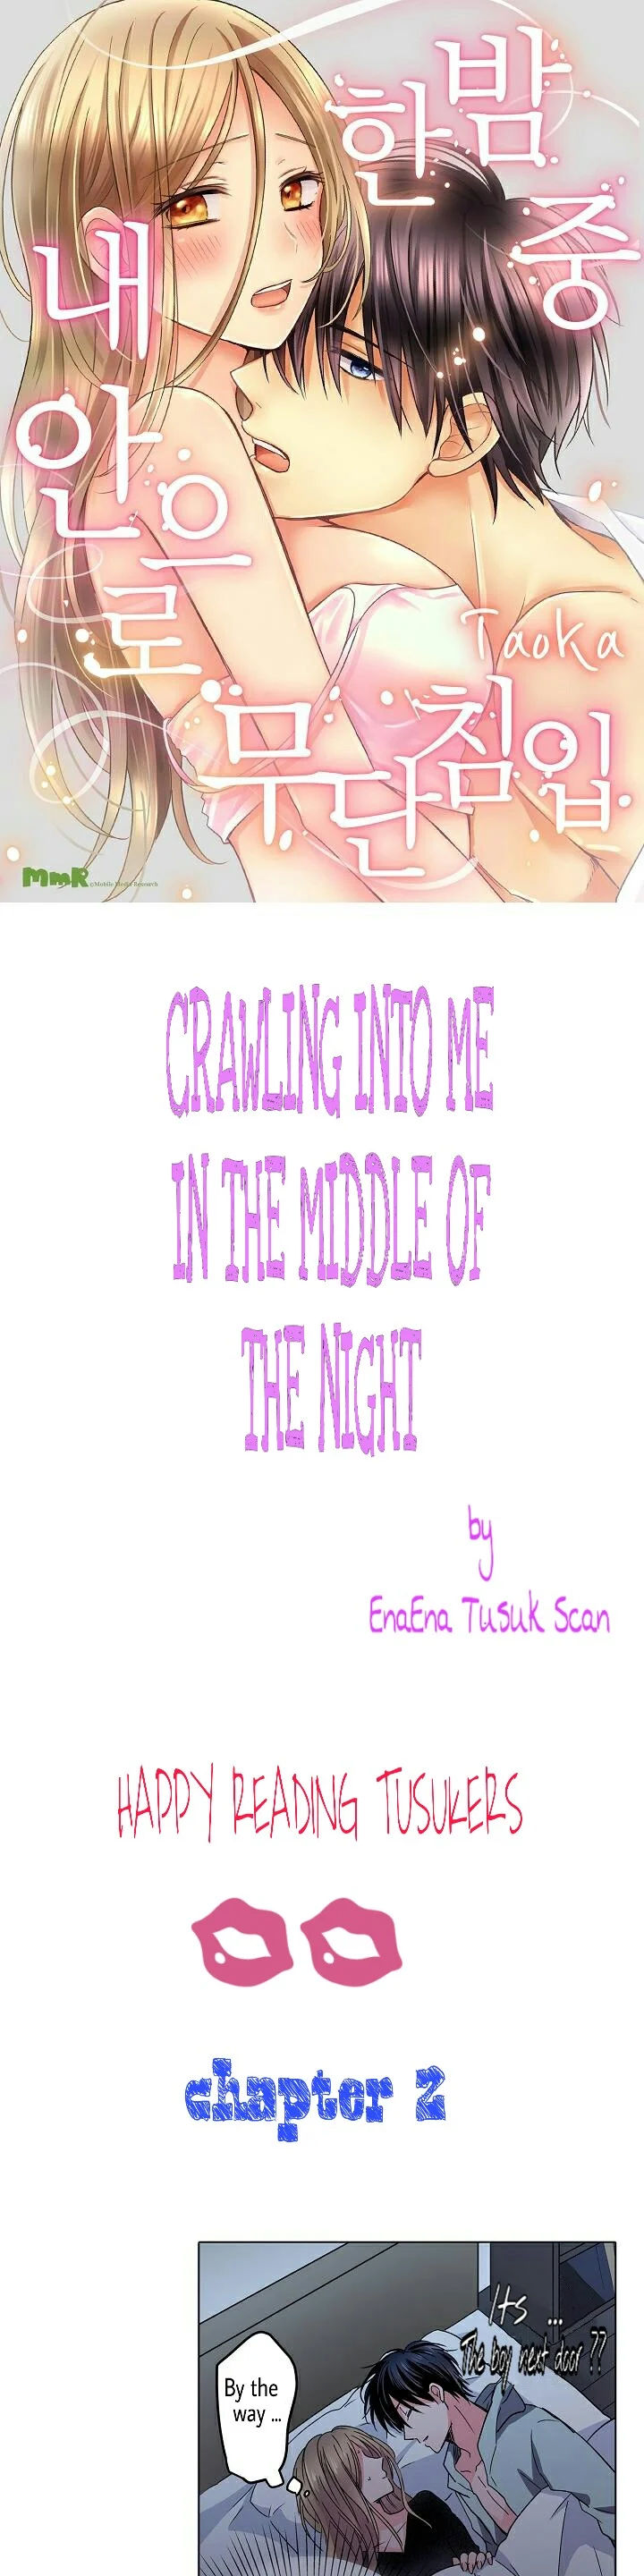 Crawling Into Me in the Middle of the Night - Chapter 2 Page 1